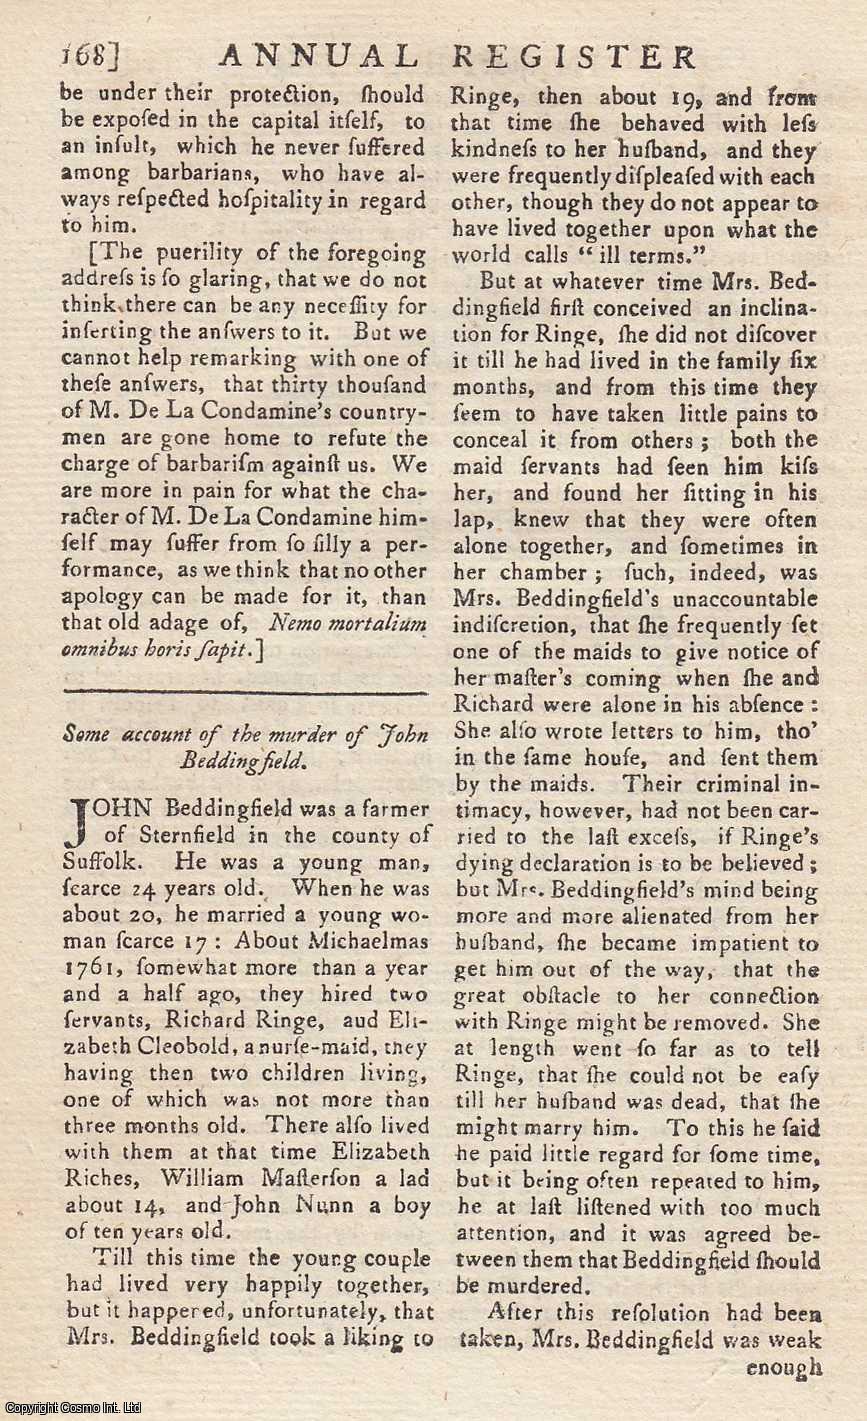 Edmund Burke - The murder of John Beddingfield [of Sternfield, Suffolk]. An original article from the Annual Register for 1763.